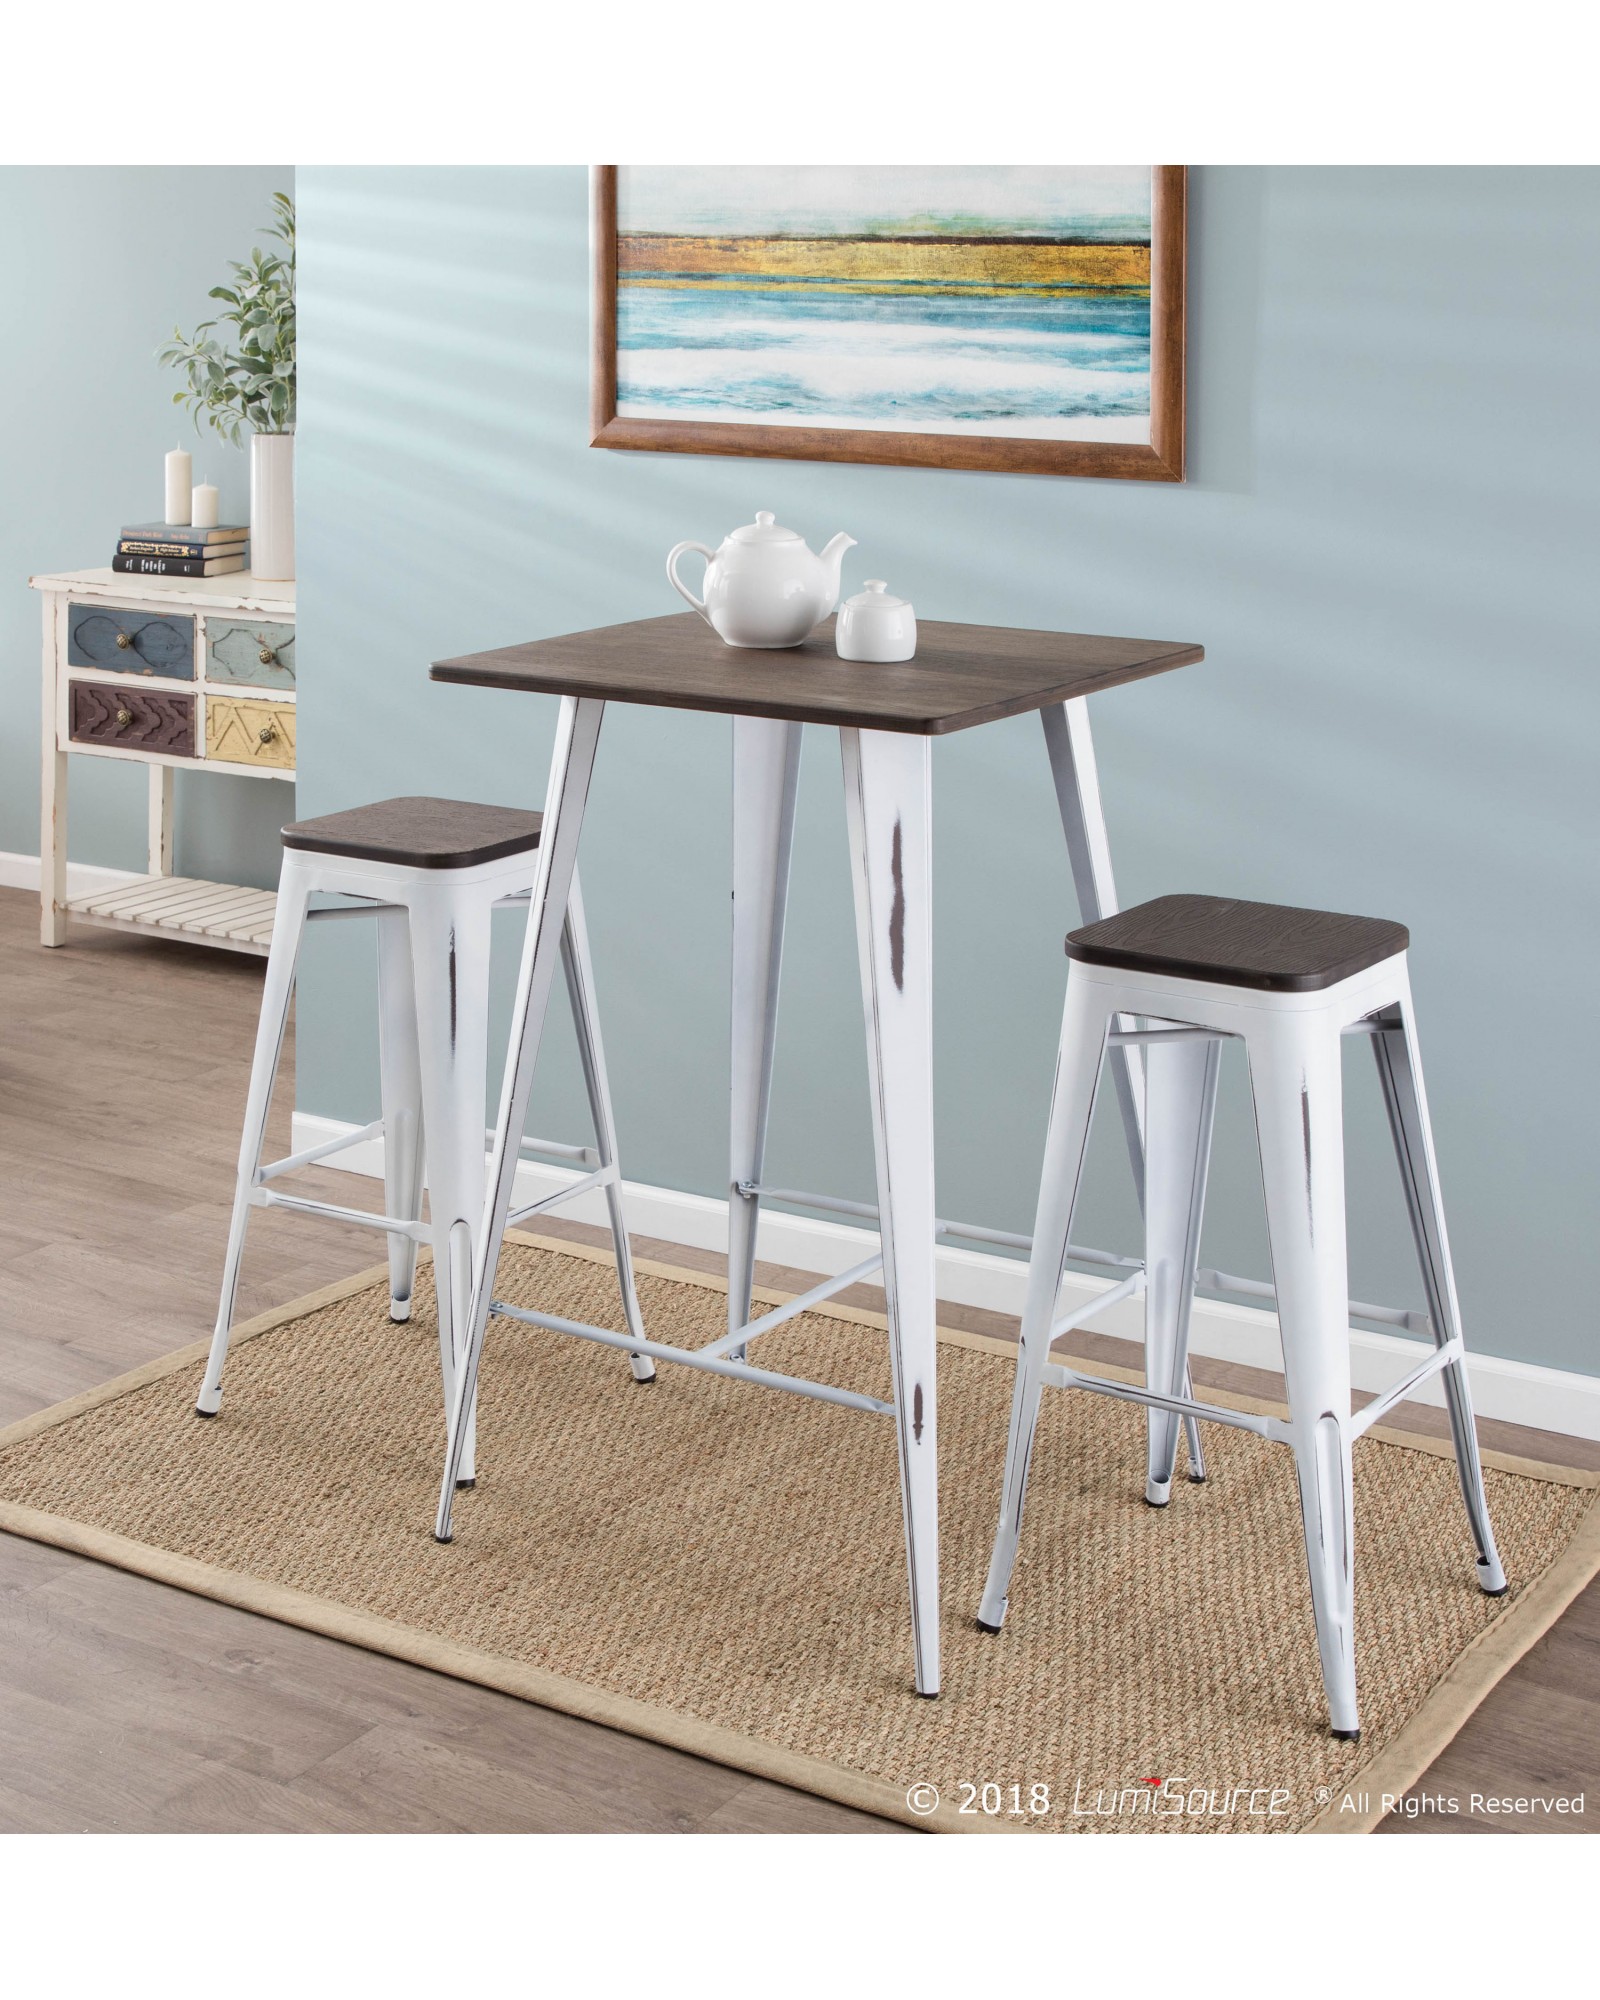 Oregon Industrial Stackable Barstool in Vintage White and Espresso - Set of 2